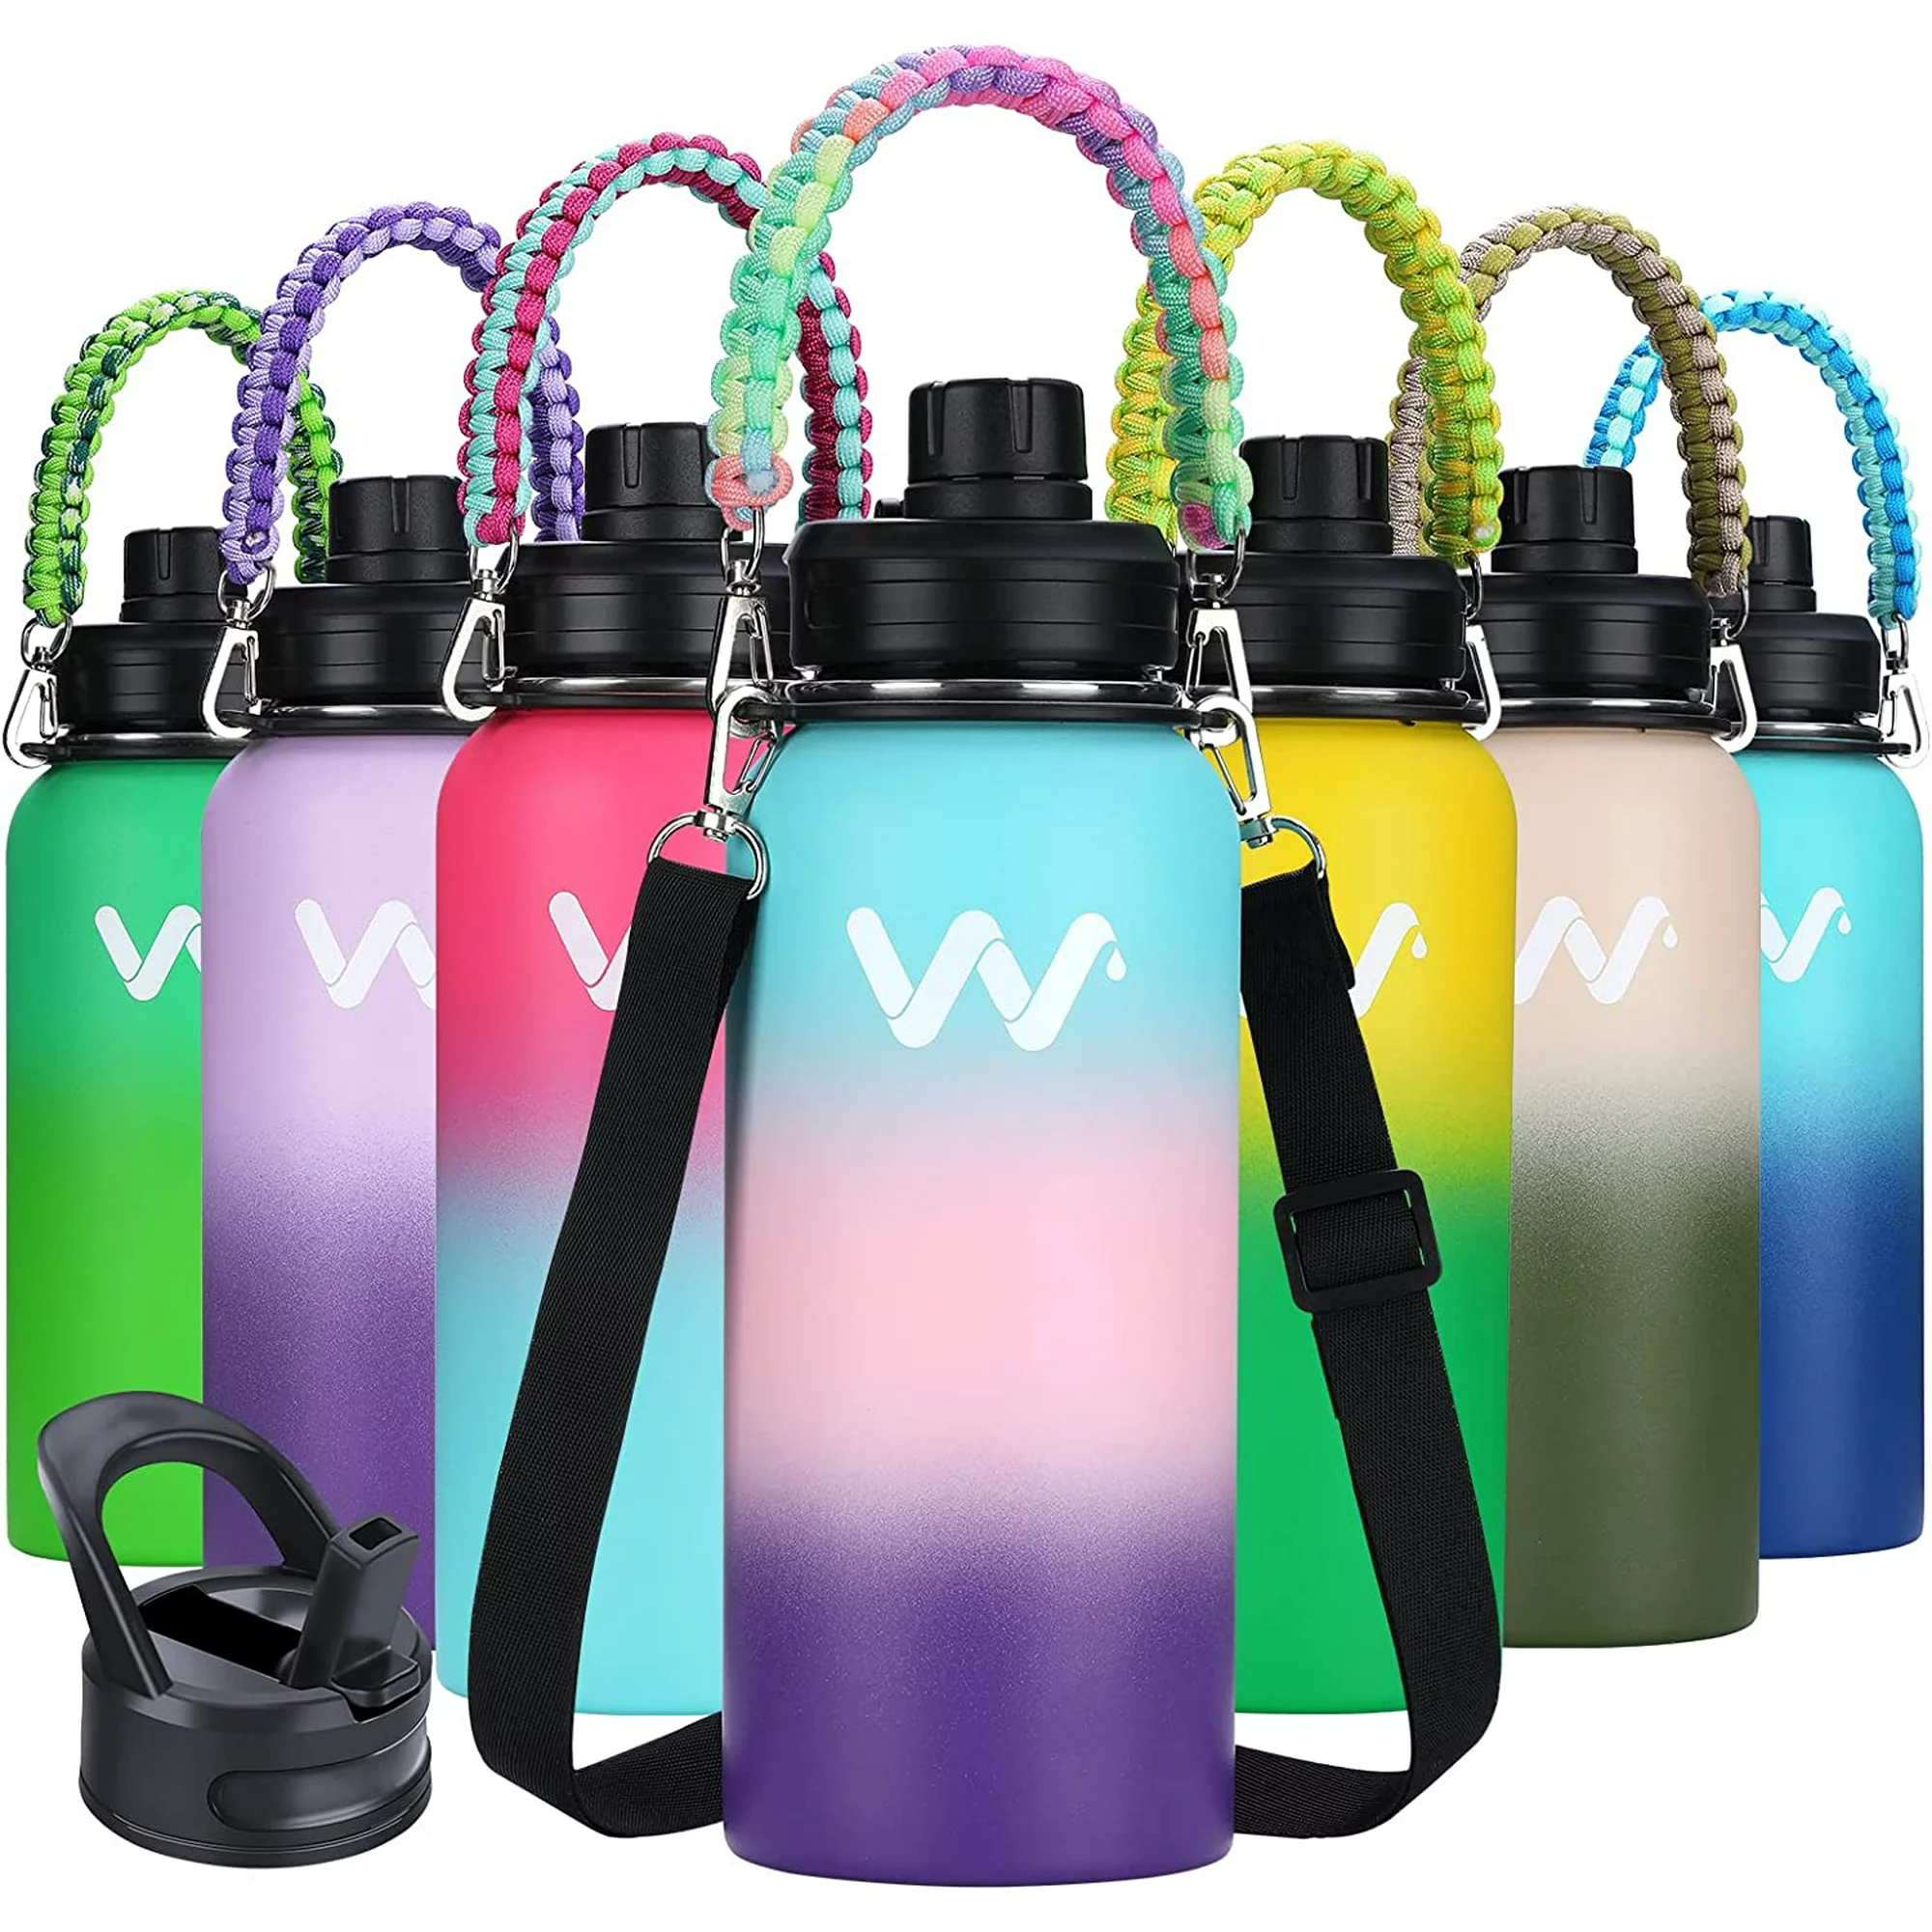 Insulated Water Bottle With Straw Lid & Spout Lid, - 32 oz - Vacuum